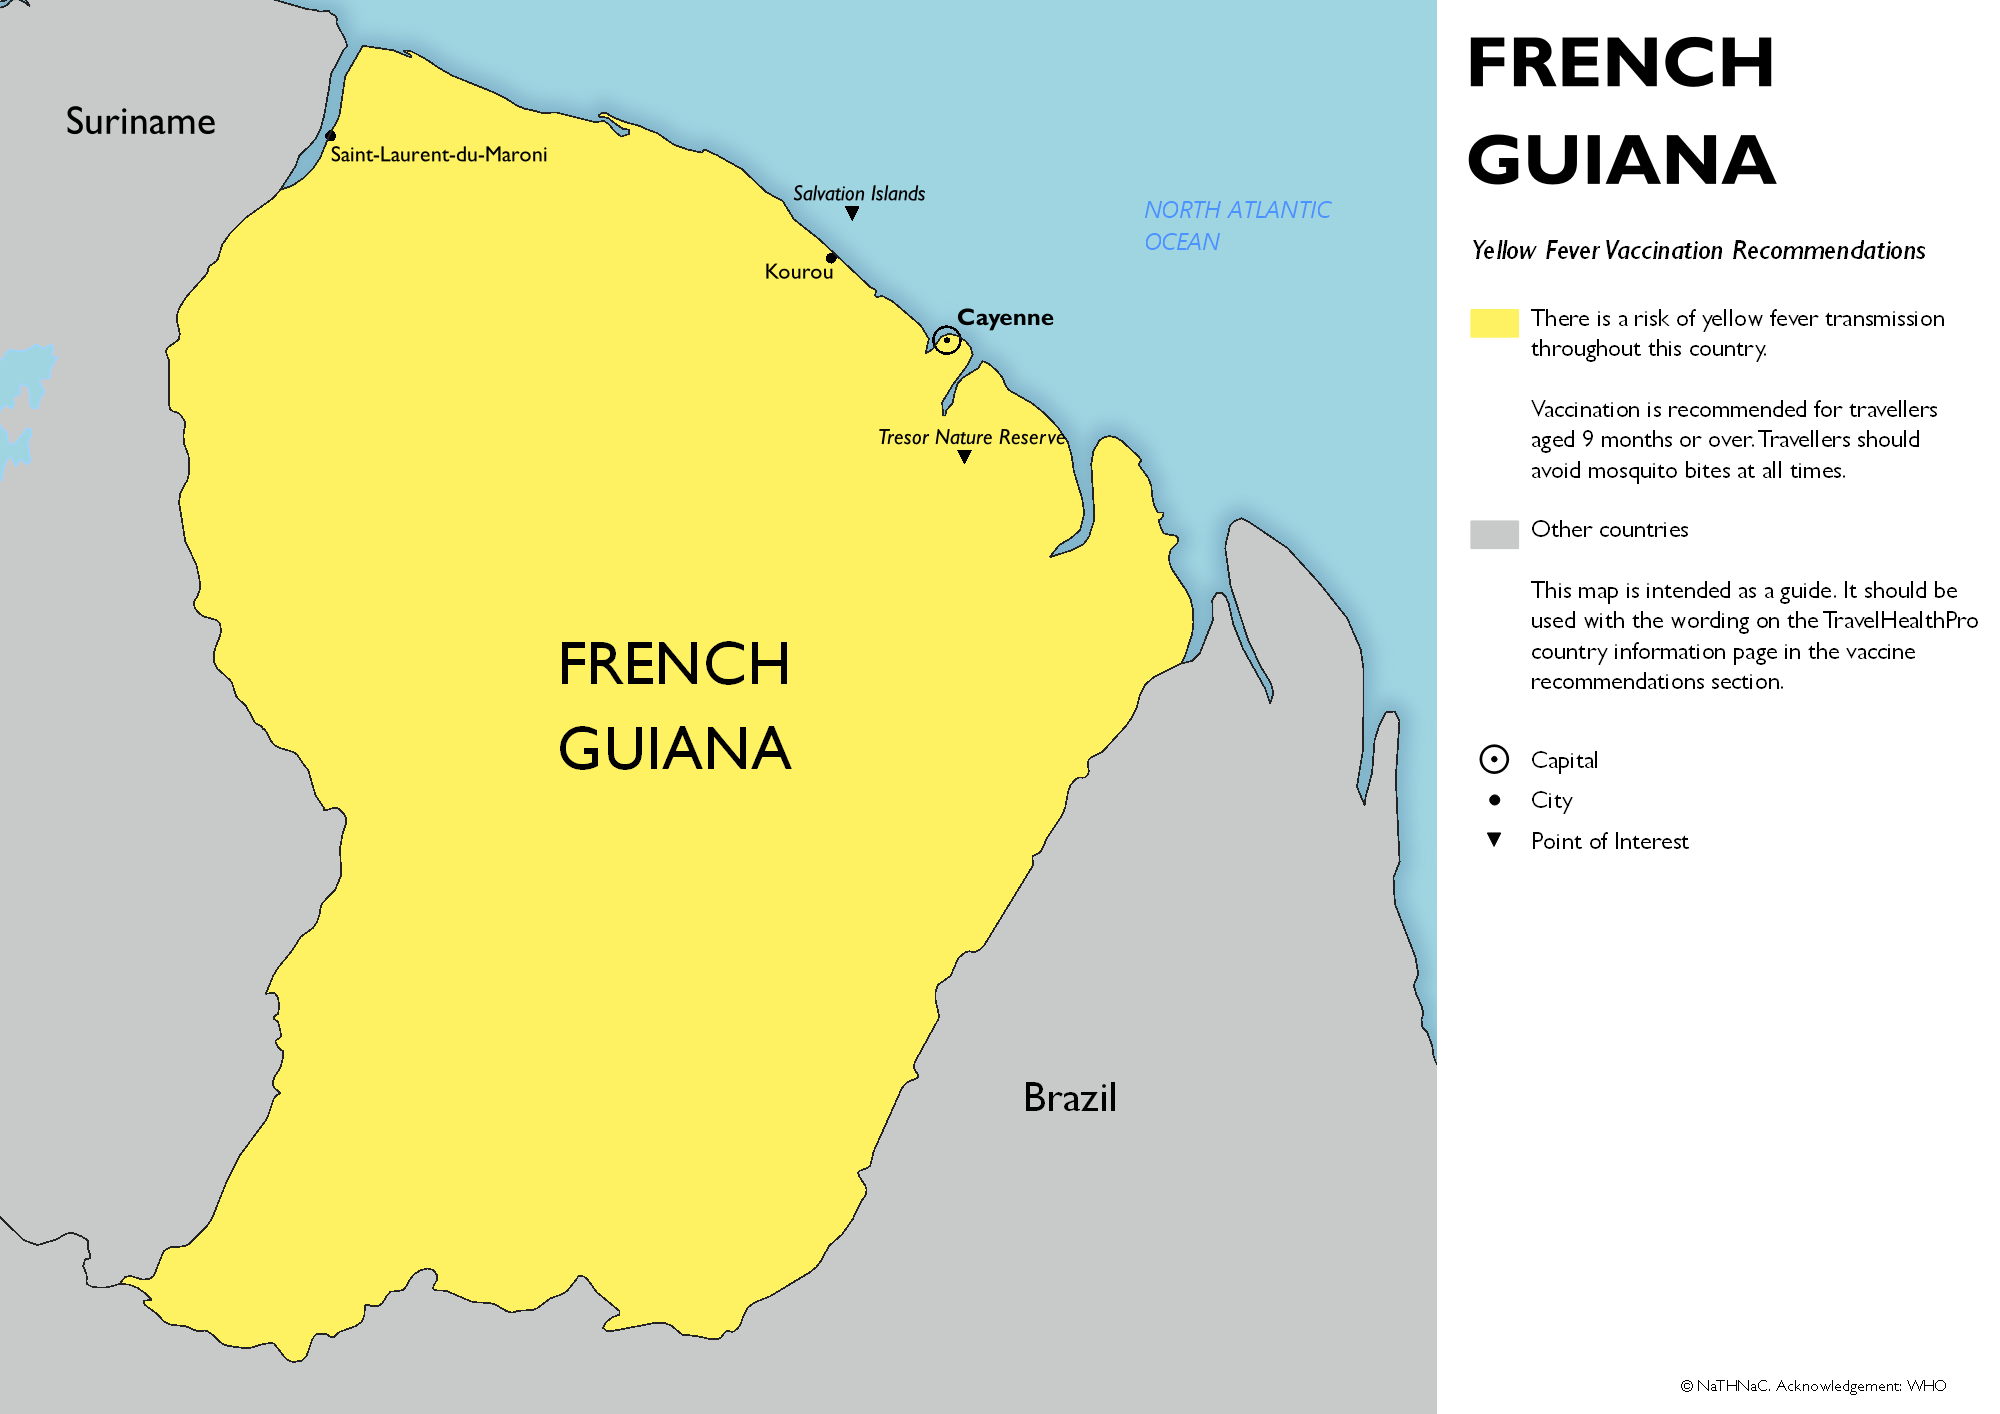 Yellow fever vaccine recommendation map for French Guiana